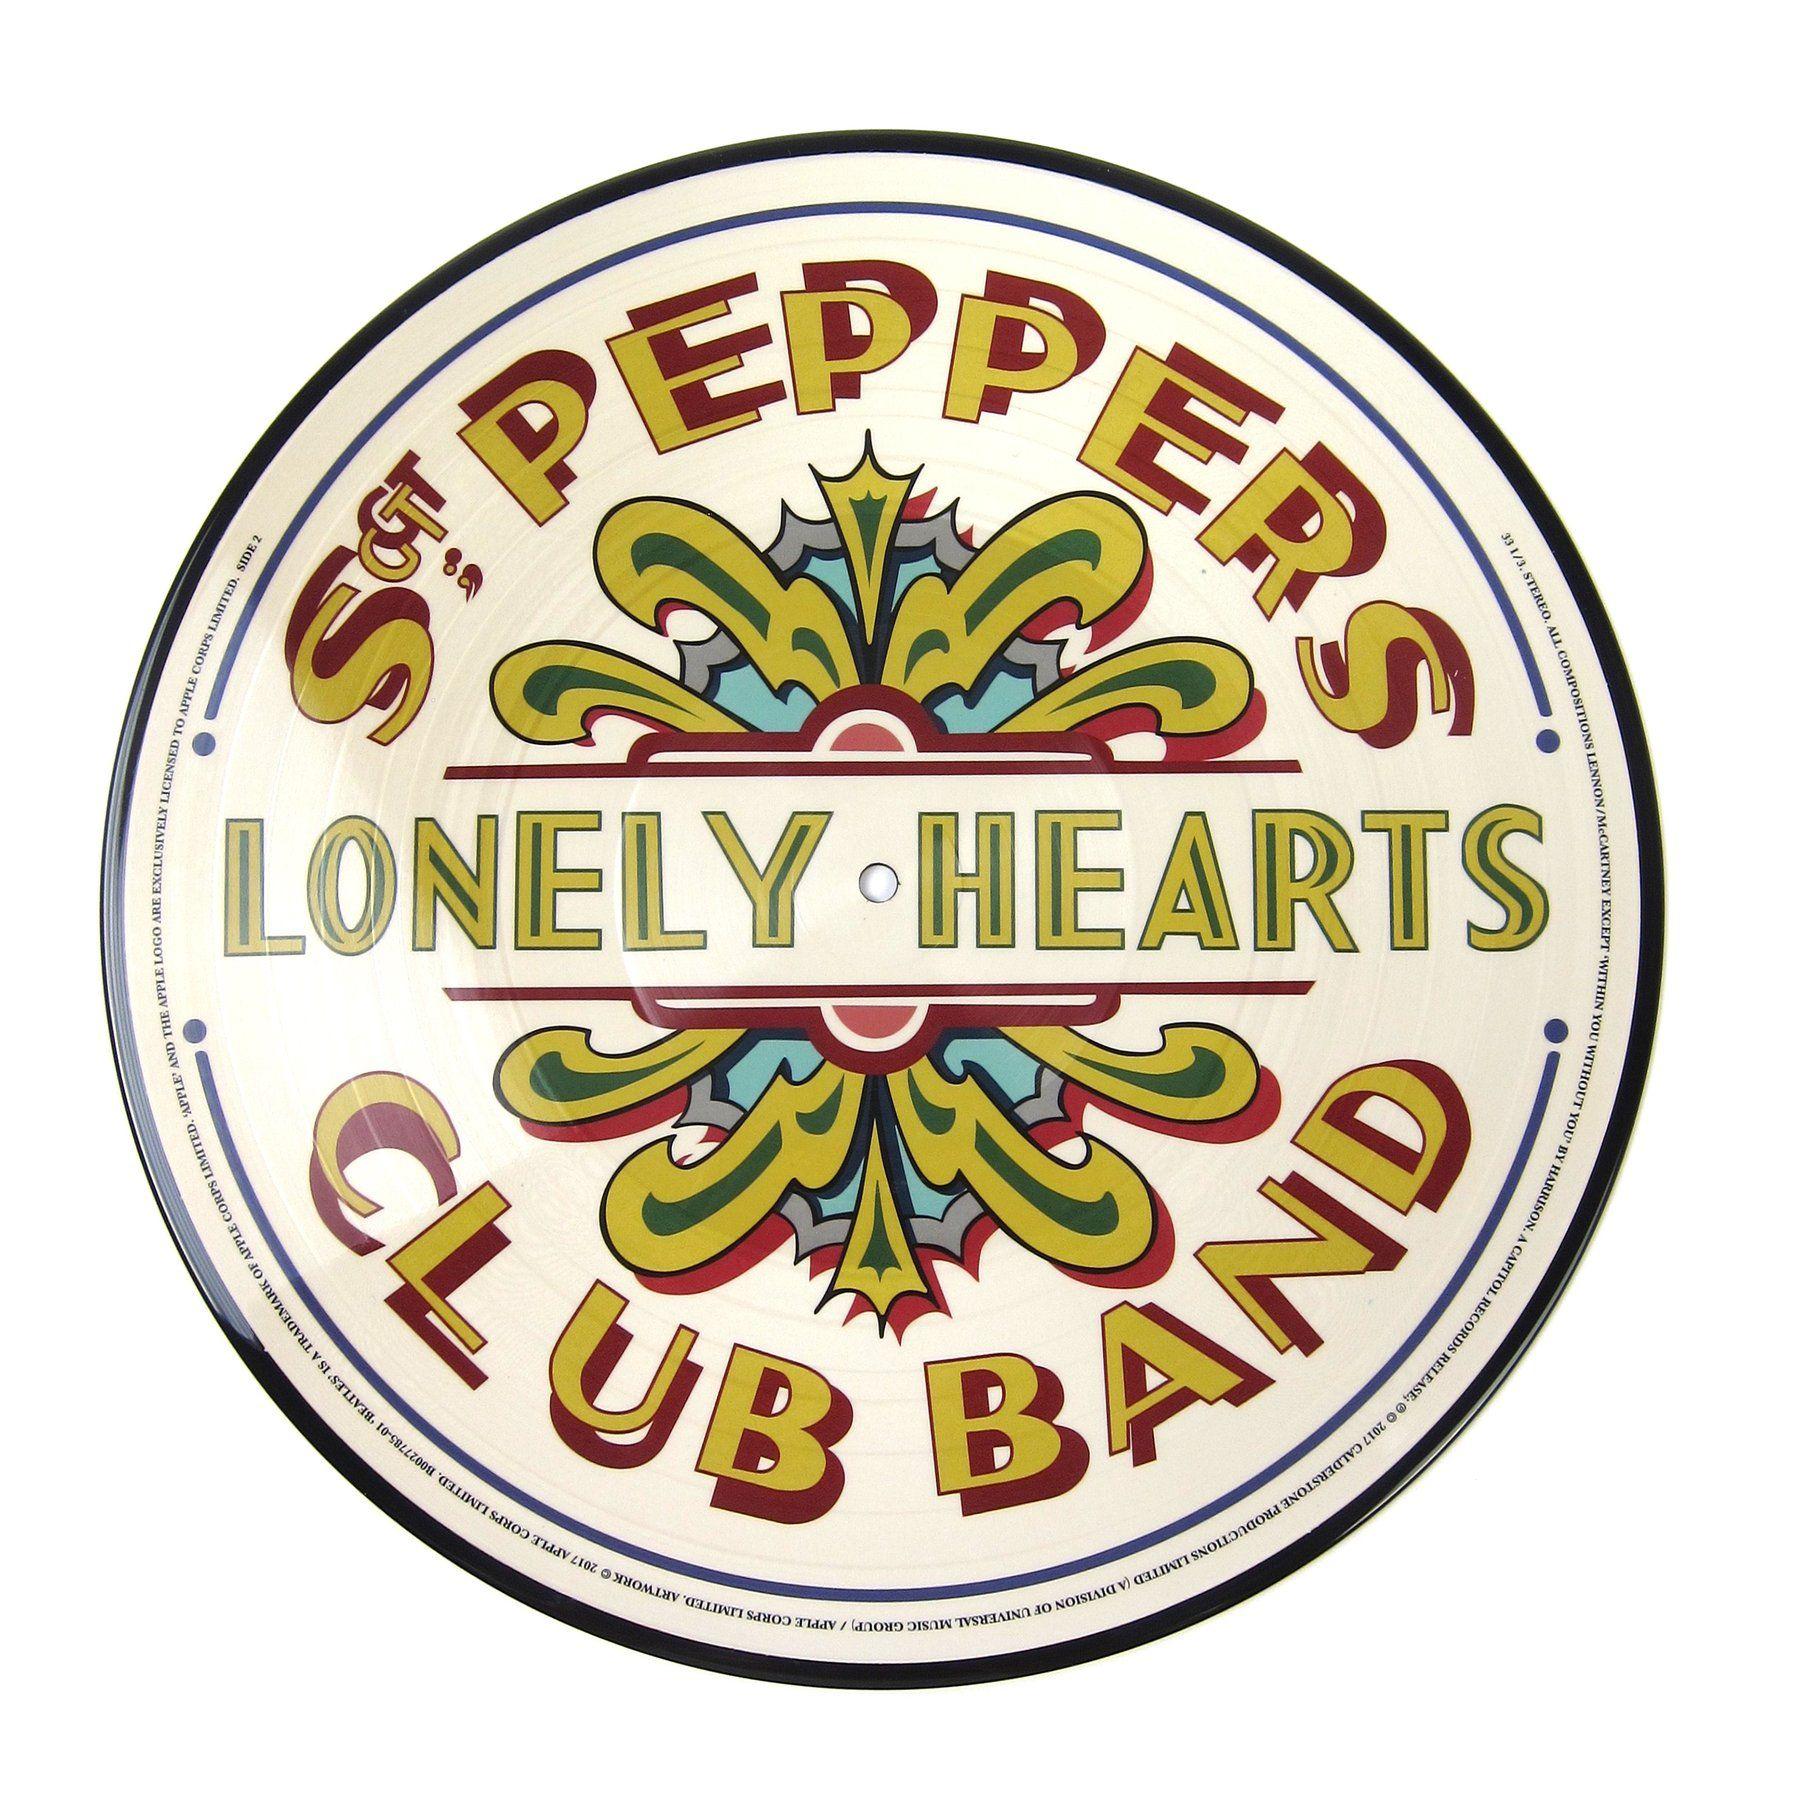 The Beatles Sgt. Pepper Logo - The Beatles: Sgt. Pepper's Lonely Hearts Club Band (Pic Disc, Giles ...